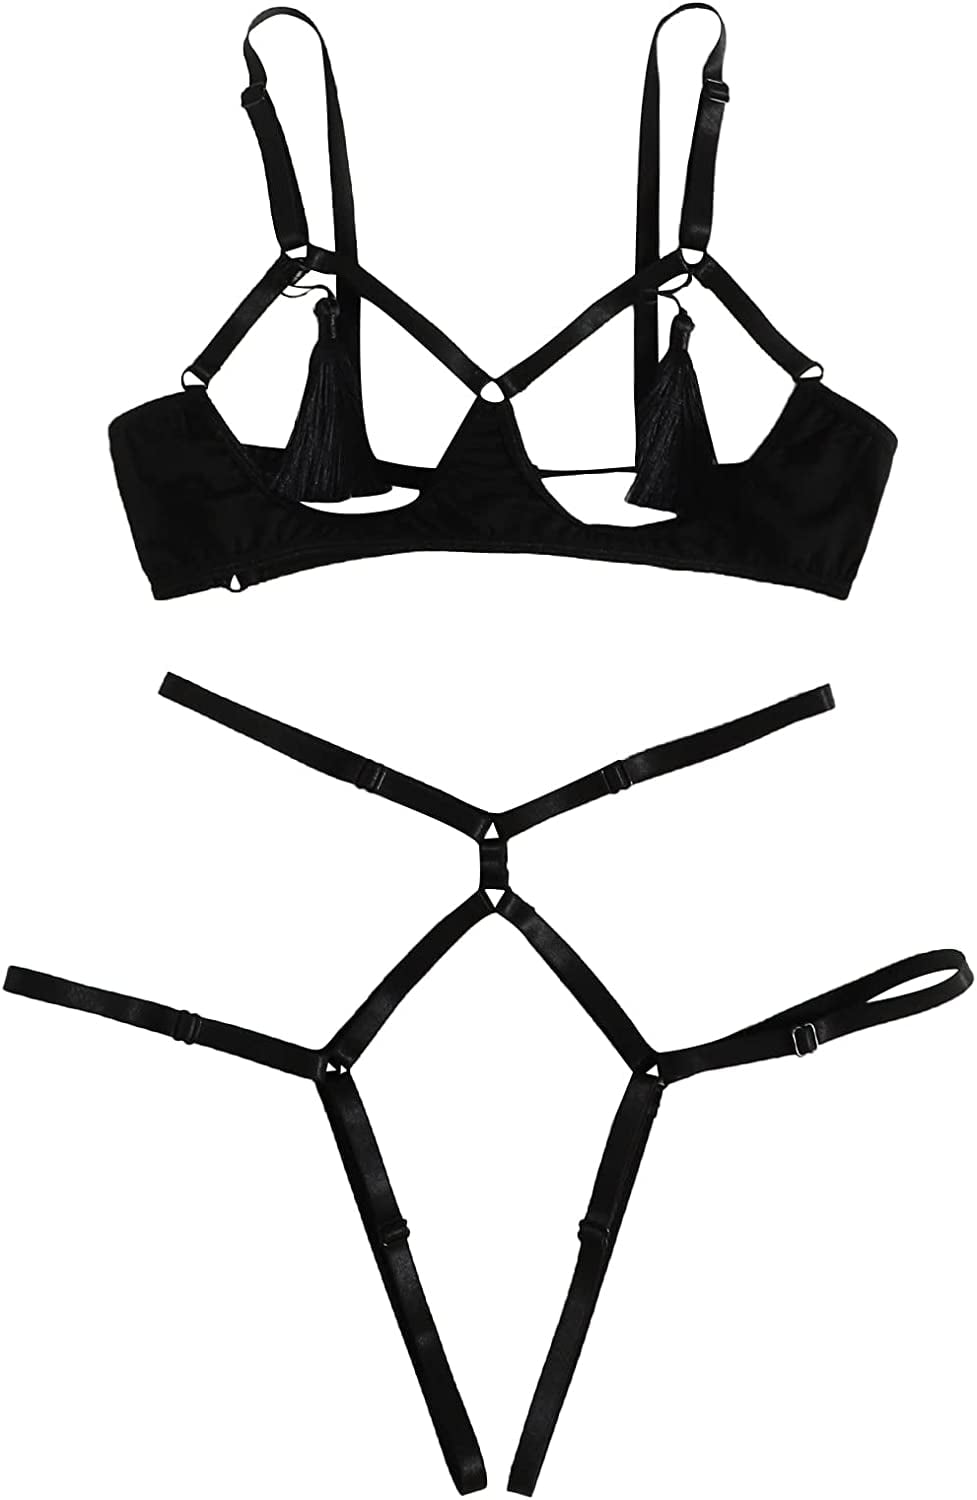 Sehao Women Clothing Sexy Underwire Push Up Strappy Embroidered Mesh Sheer  Lingerie Set For Women Bra Lace Black 